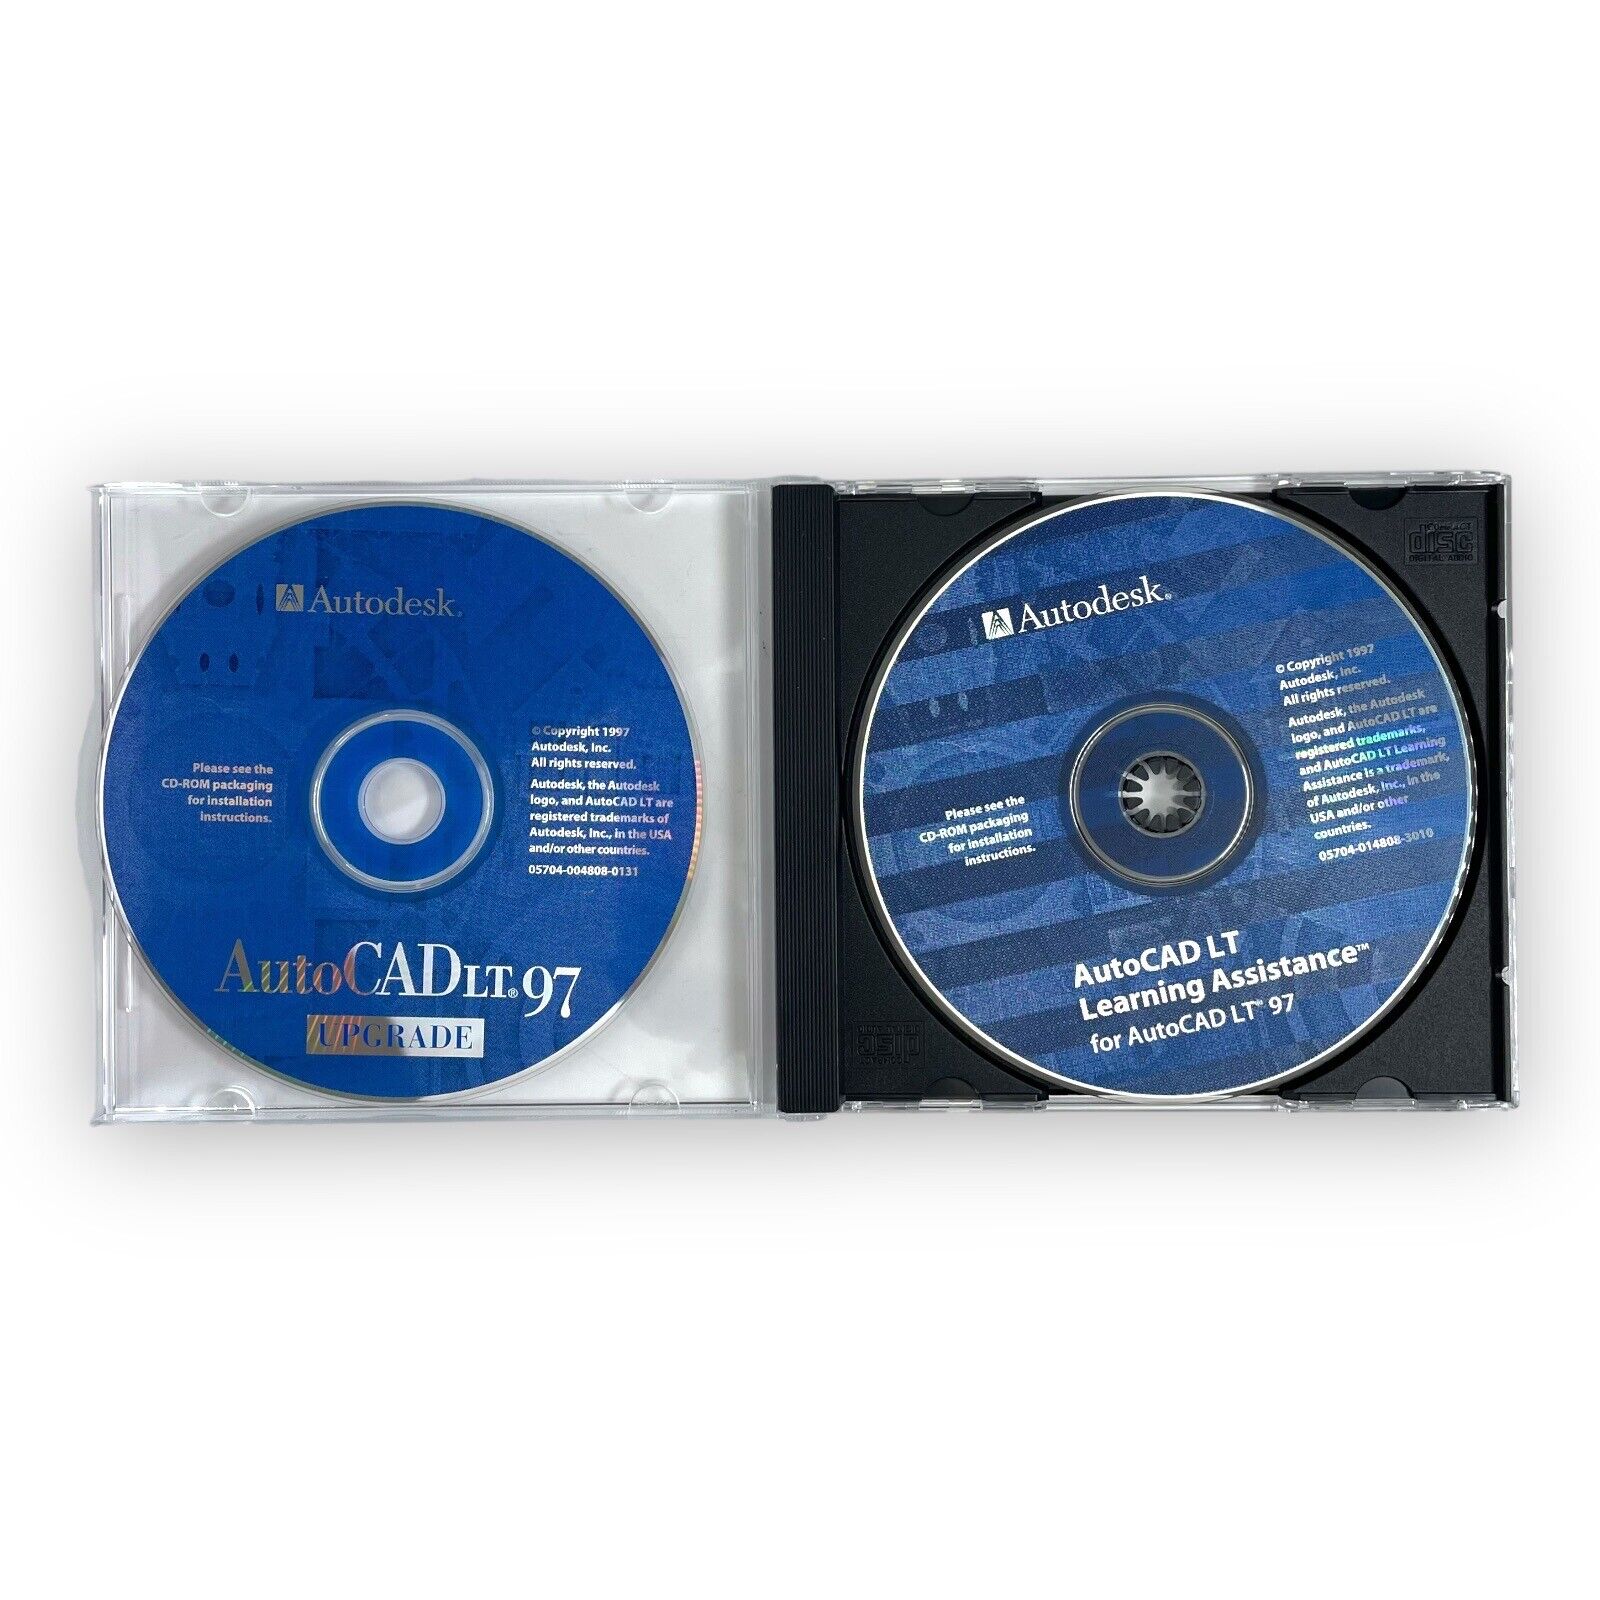 Autodesk AutoCAD LT 97 UPGRADE ONLY CD-ROM + Serial Key and Learning Assistance